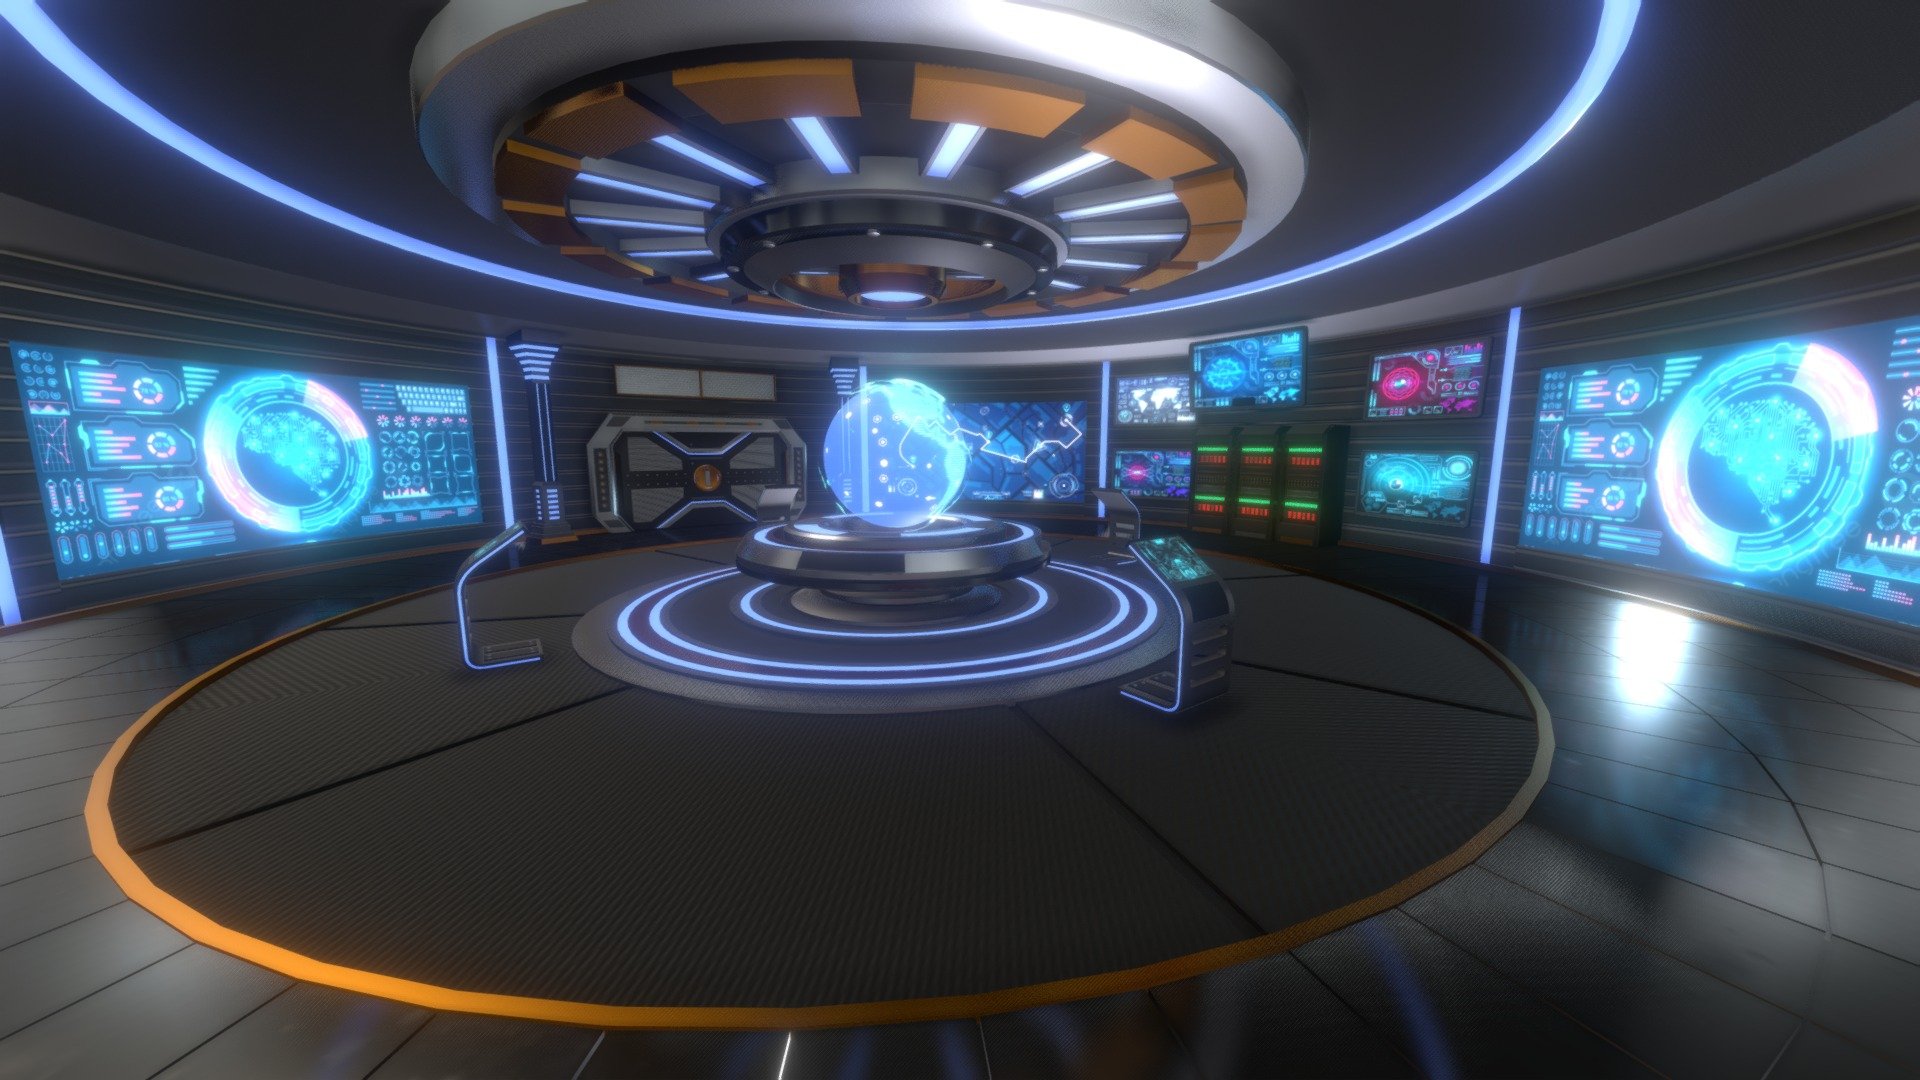 Sci-Fi Command Room Interior 3D Model can be used as an command room, futuristic interior, sci-fi scene, etc. in your sci-fi scenes, videos, games, and others.  

All textures and materials are included and mapped in every format. The model is completely ready for visualization in any 3d software and engine.  

Technical details:  




File formats included in the package are: FBX, OBJ, GLB, PLY, STL, ABC, DAE, BLEND, Unity, Unreal, gLTF (generated), USDZ (generated)

Native software file format: BLEND

Render engine: Cycles

Polygons: 63,711

Vertices: 70,707

Textures: Base, Emissive, Metallic, Normal, Roughness

All textures are 2k resolution.

Note:  




Model is separated into 10 major segments.
 - Sci-Fi Command Room Interior 3D Model - Buy Royalty Free 3D model by 3DDisco 3d model